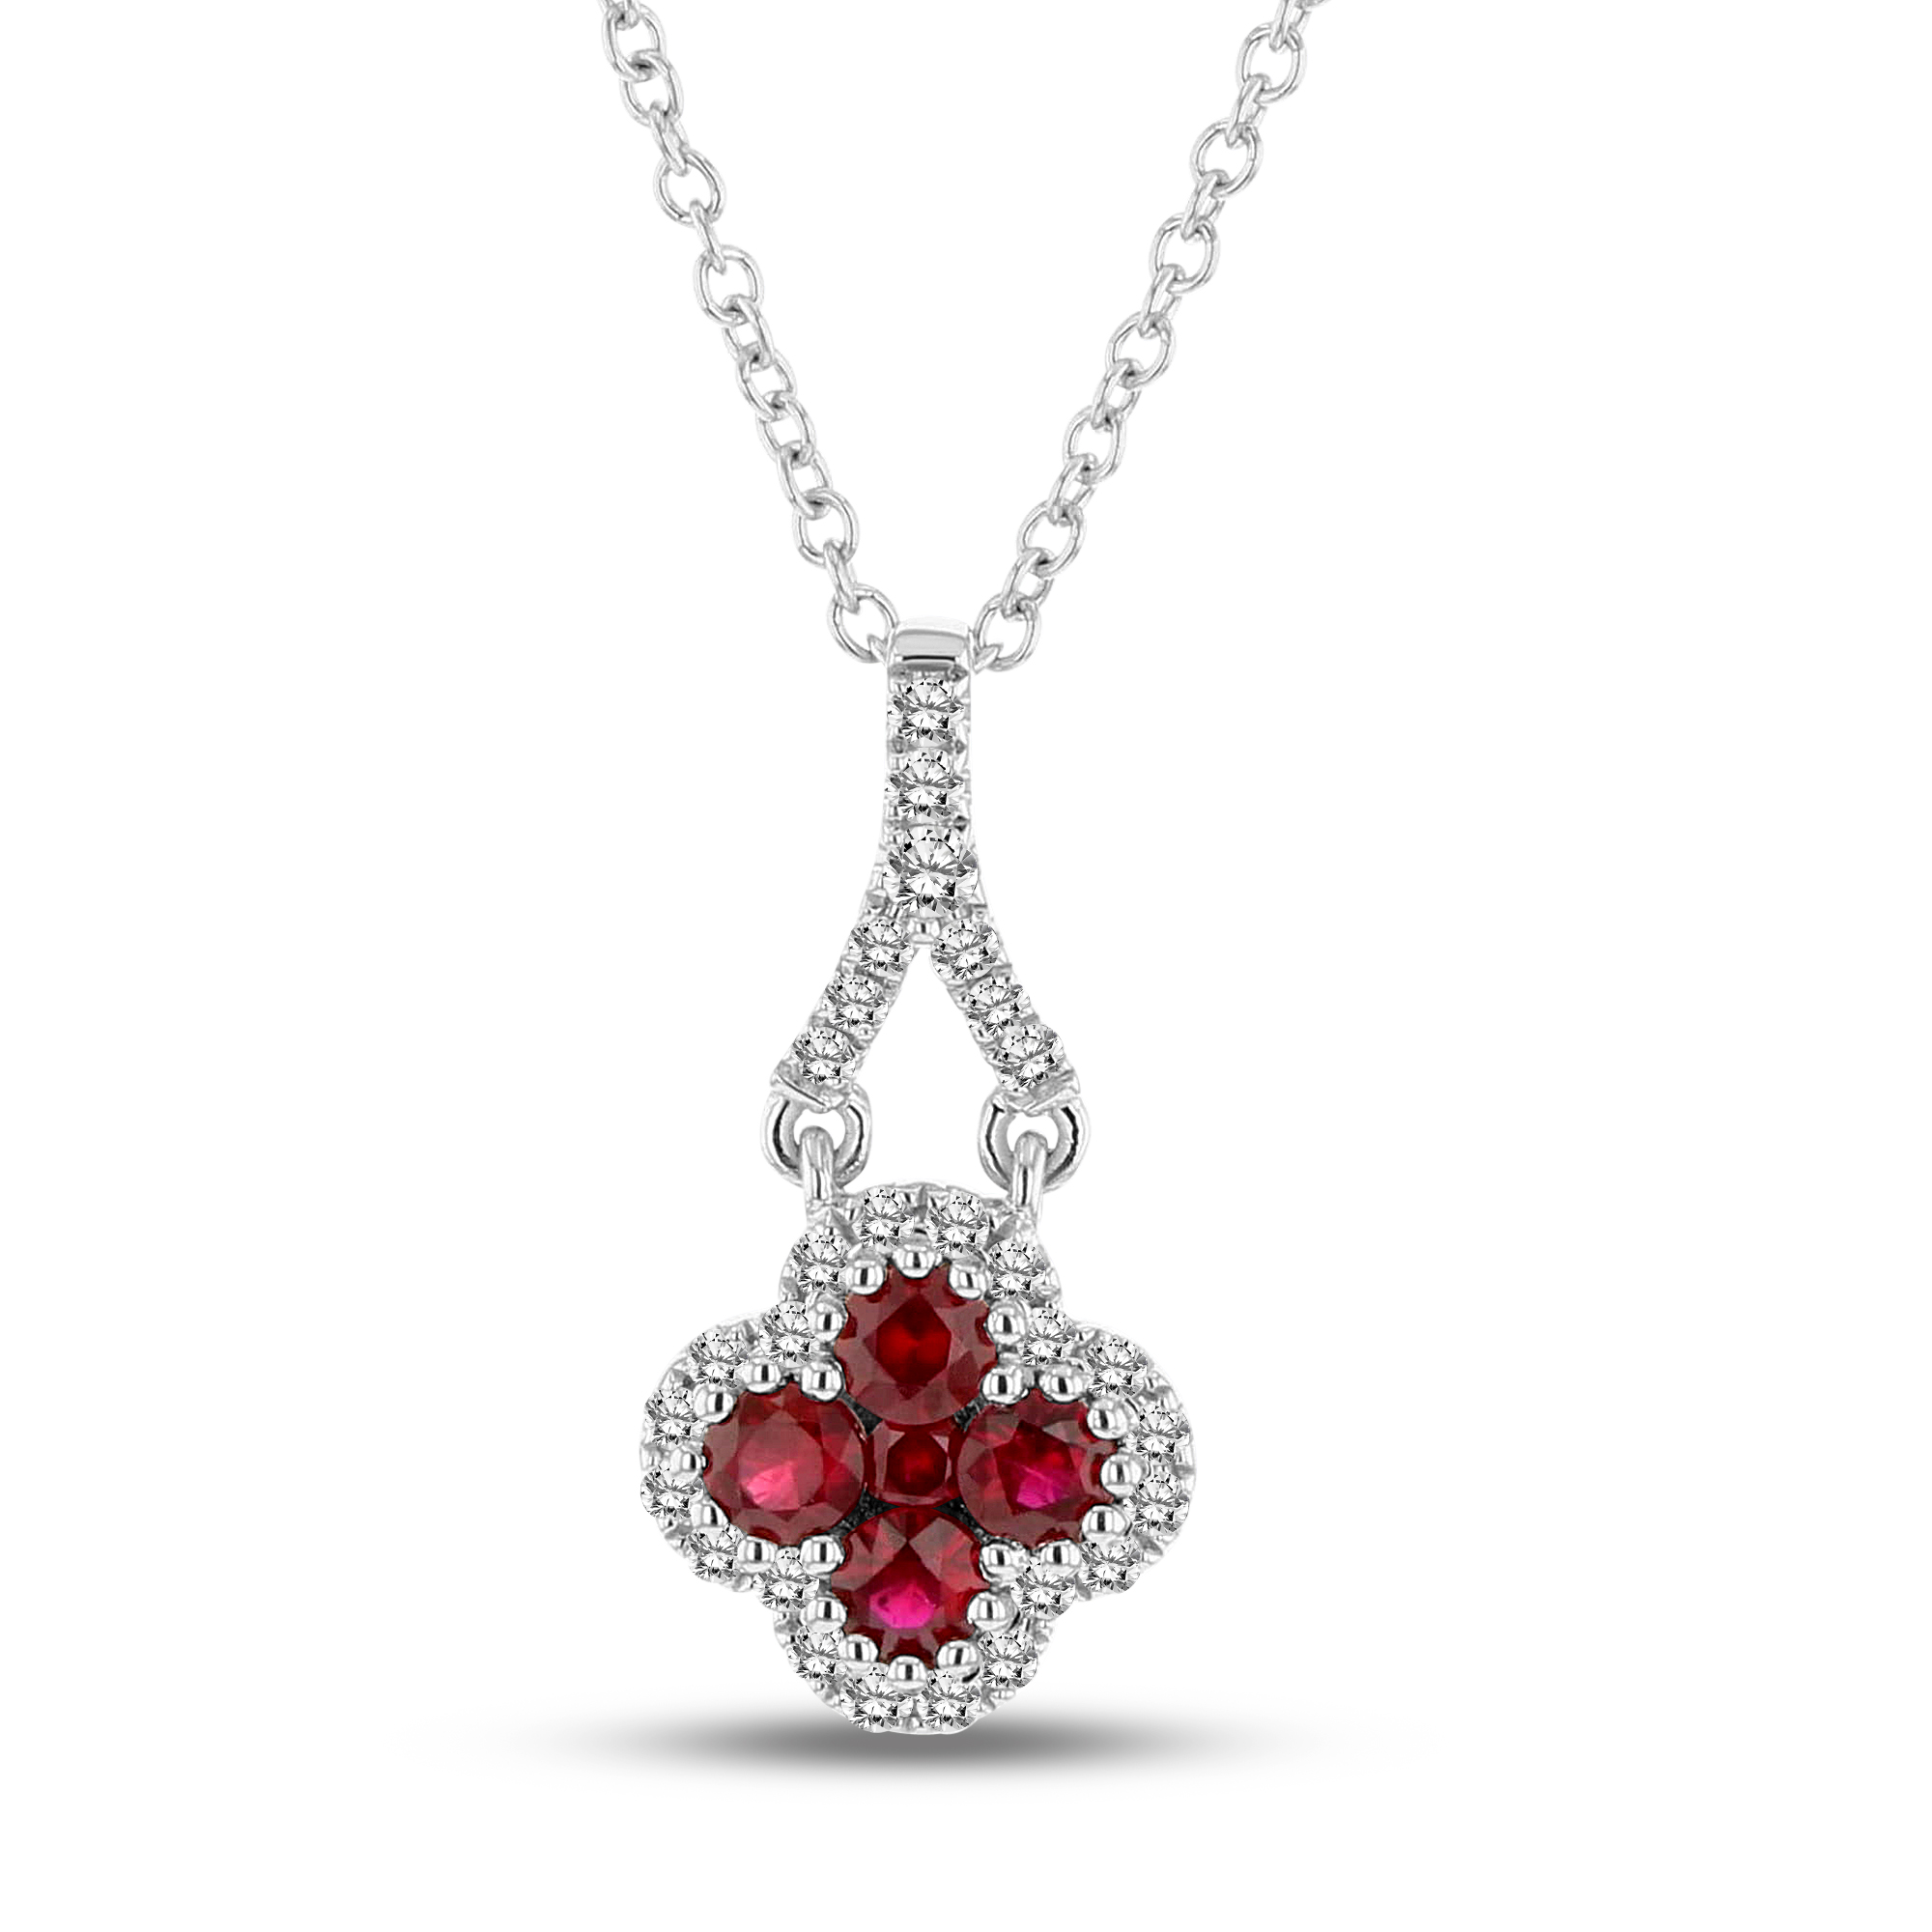 0.11ctw Diamond and Ruby Pendant in 18k White Gold